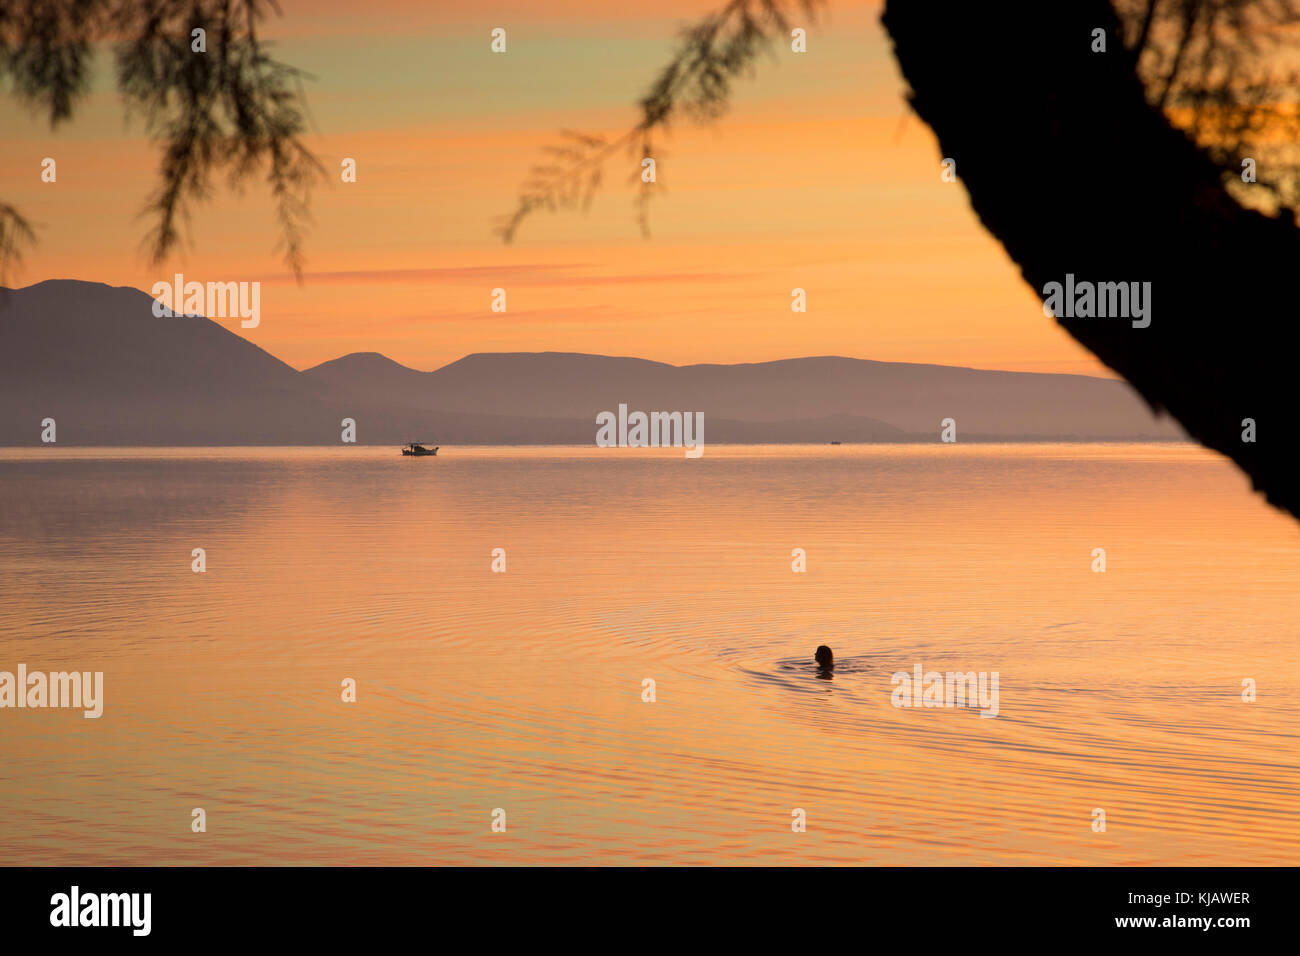 The calm sea reflects the bright orange dawn sky and ripples surround the distant, silhouetted head of a lone swimmer. Stock Photo